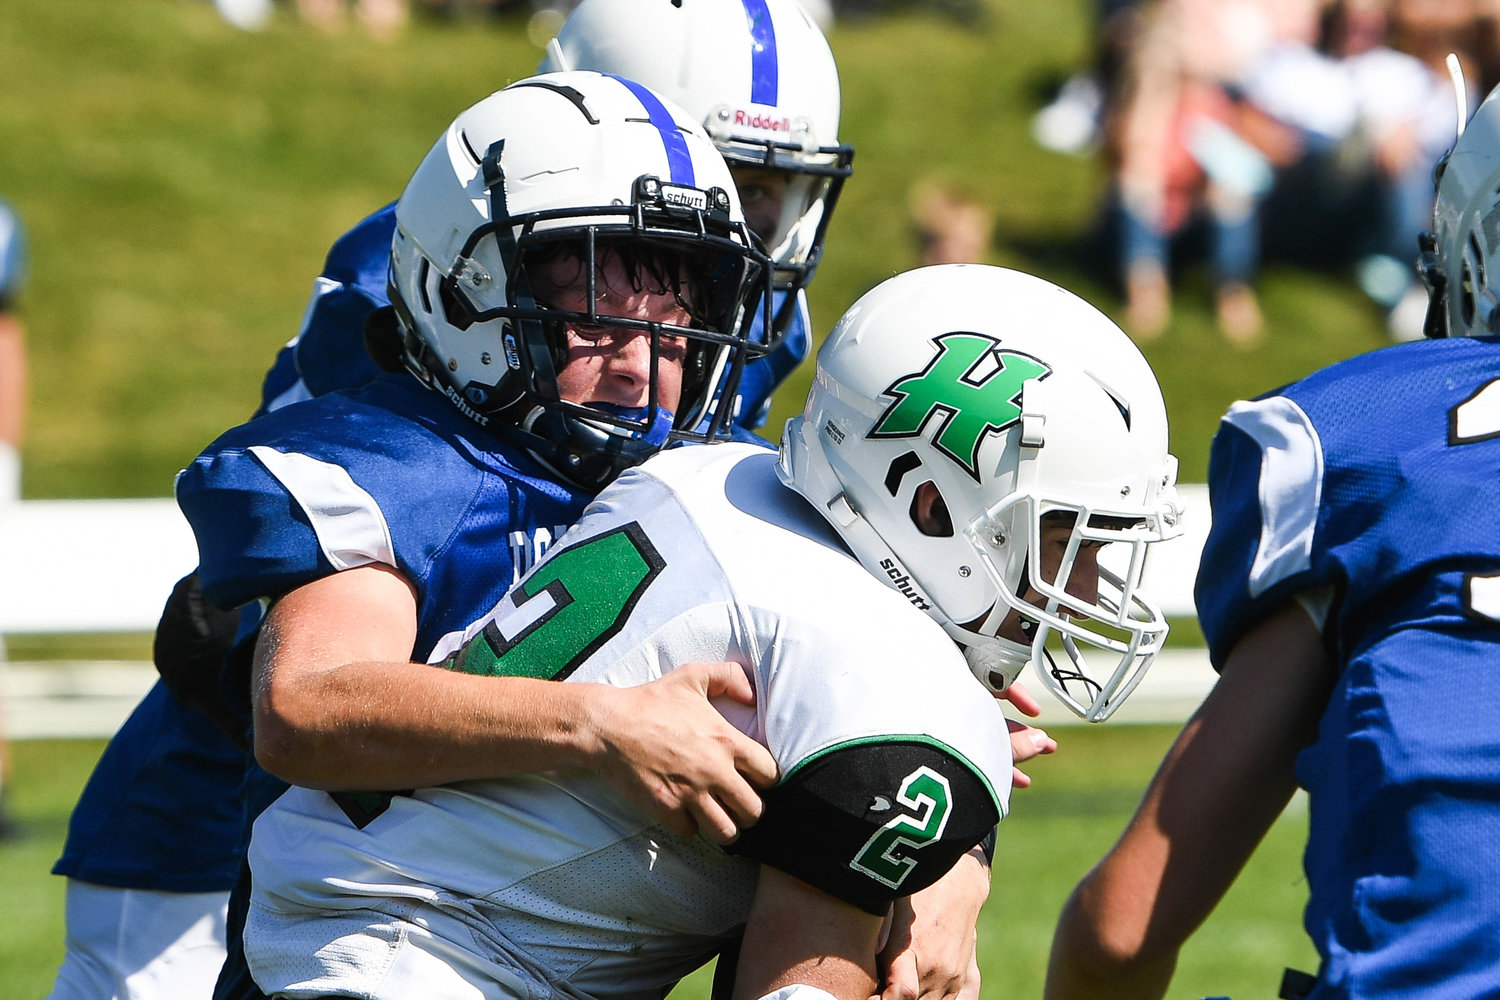 Herkimer running back John Maher (2) is tackled by Dolgeville defender Kolbi Hadden during the Class D game on Saturday. The Blue Devils won 68-20.